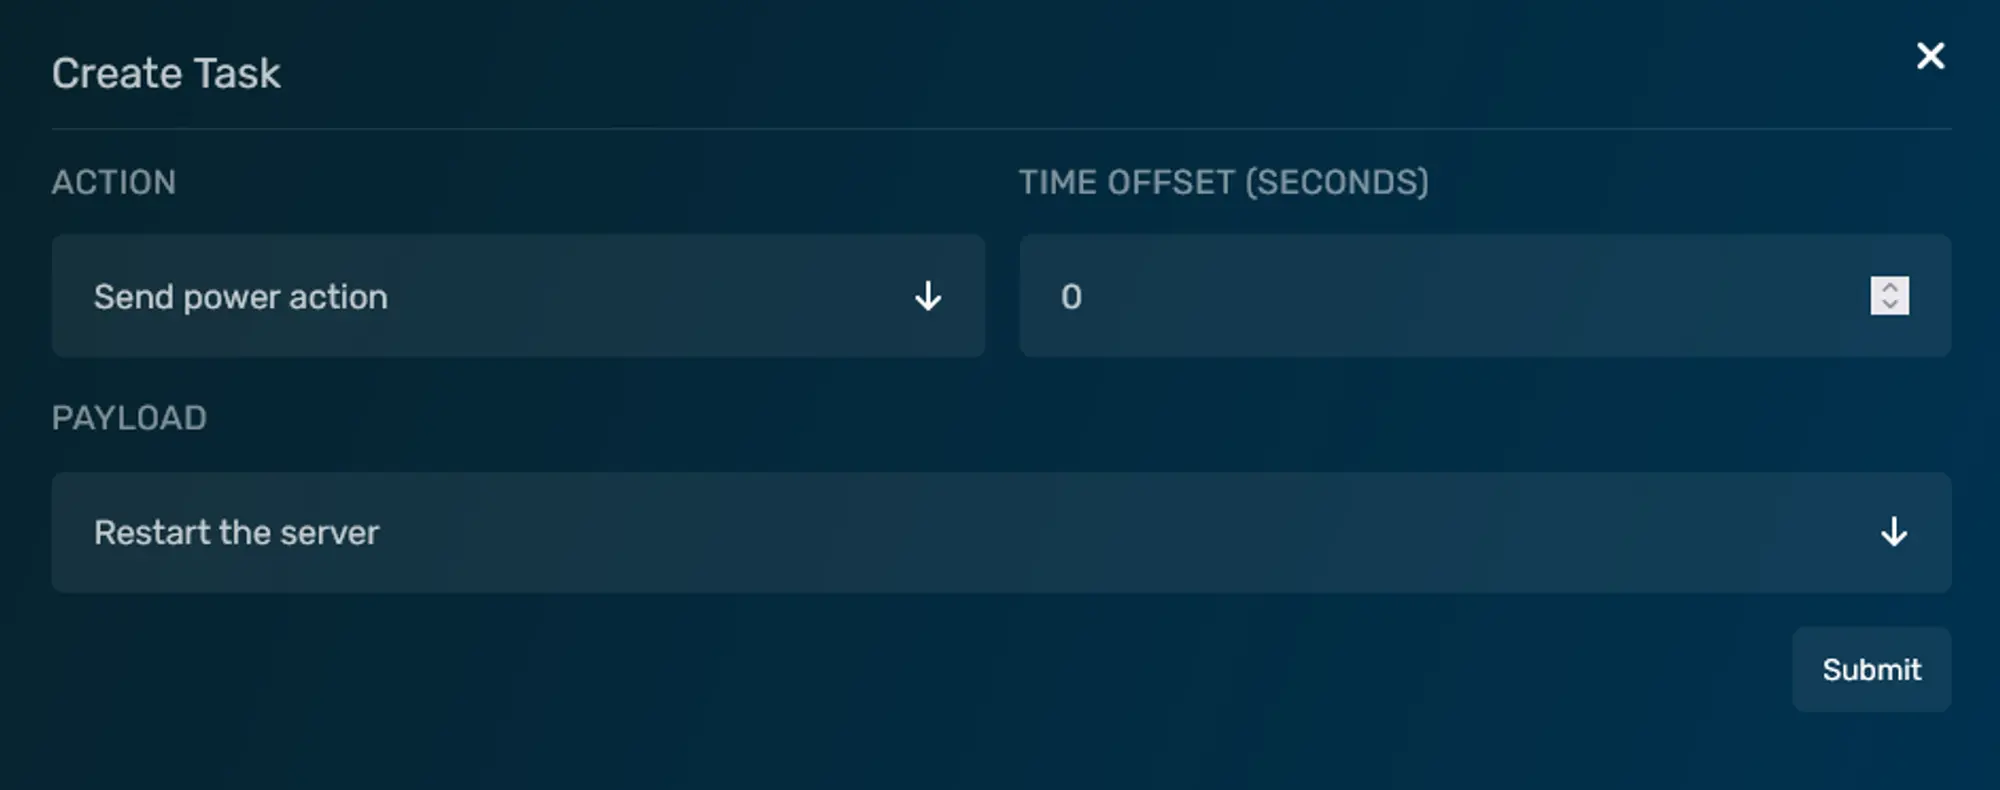 A power action task with the Action drop down located on the top left, the time offset located on the top right, and the payload drop down spanning the entire width of the bottom of the modal